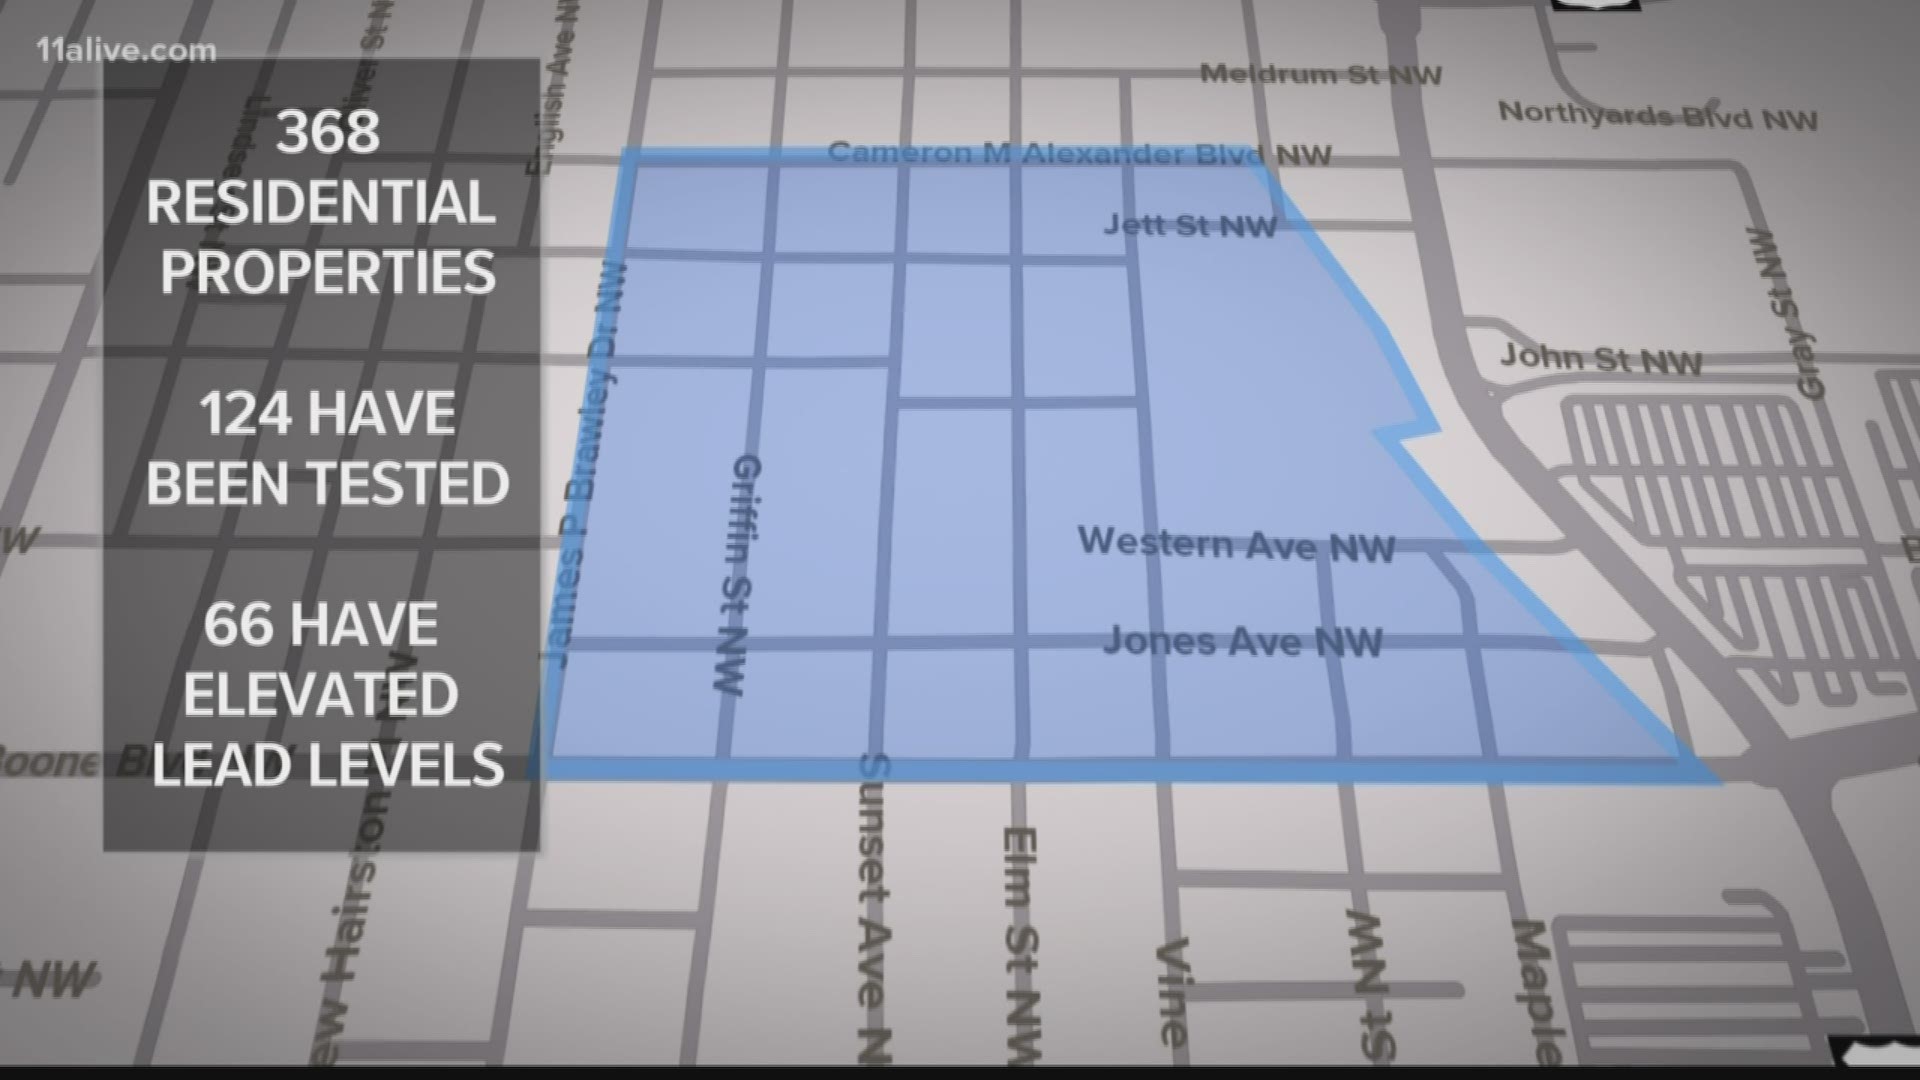 There are 368 homes in the area. The EPA has already tested the soil in 128. Of those, 66 had elevated levels of lead.